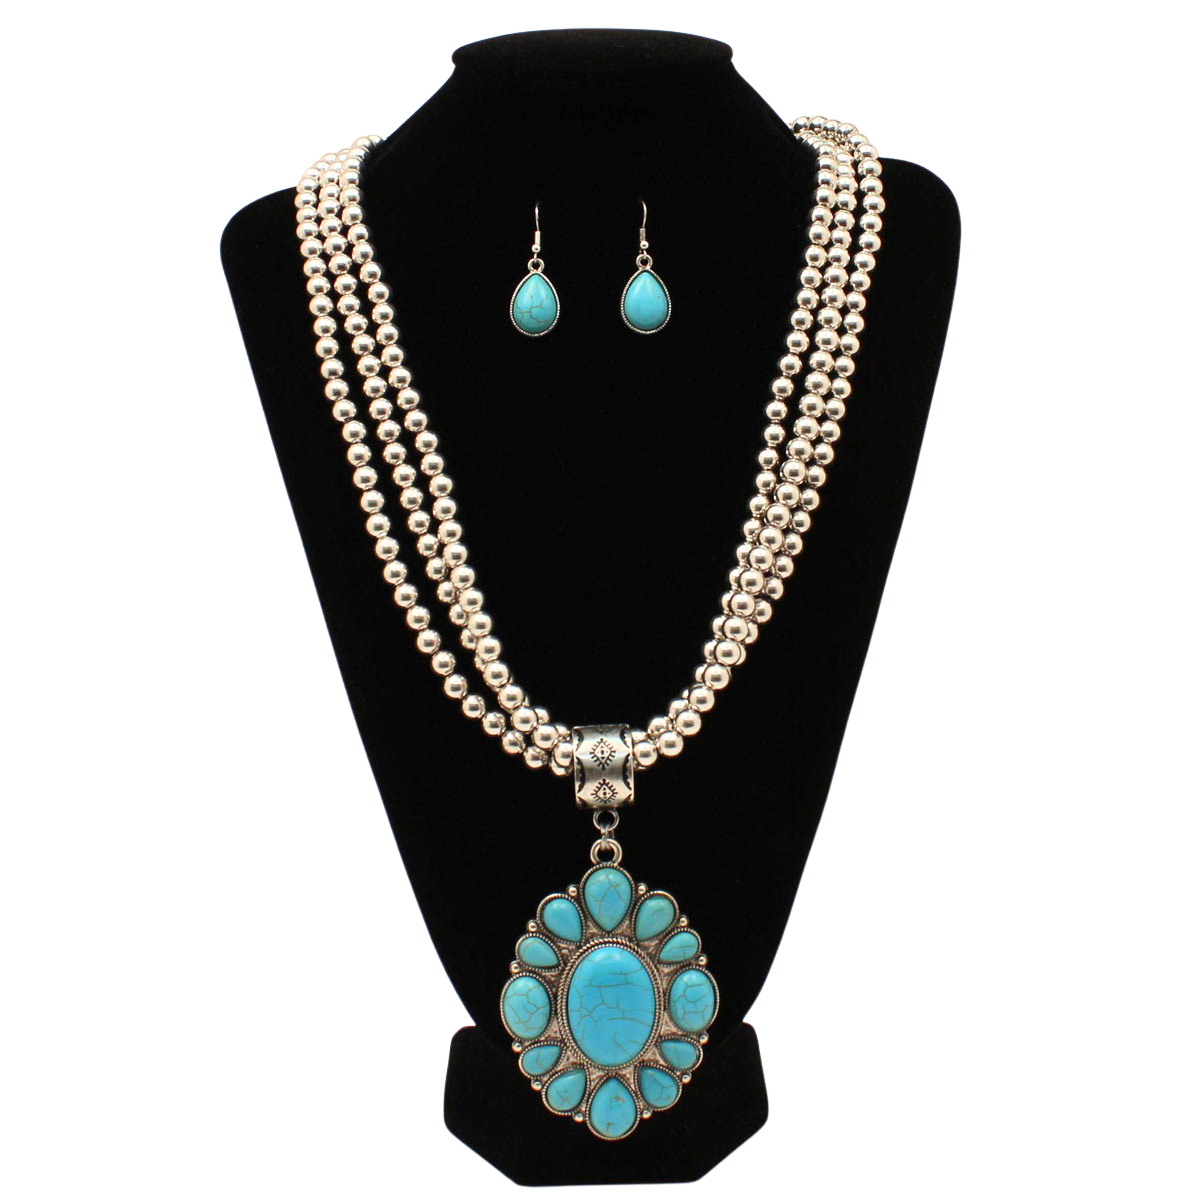 Silver Strike Turquoise Beaded Necklace & Earring Jewelry Set